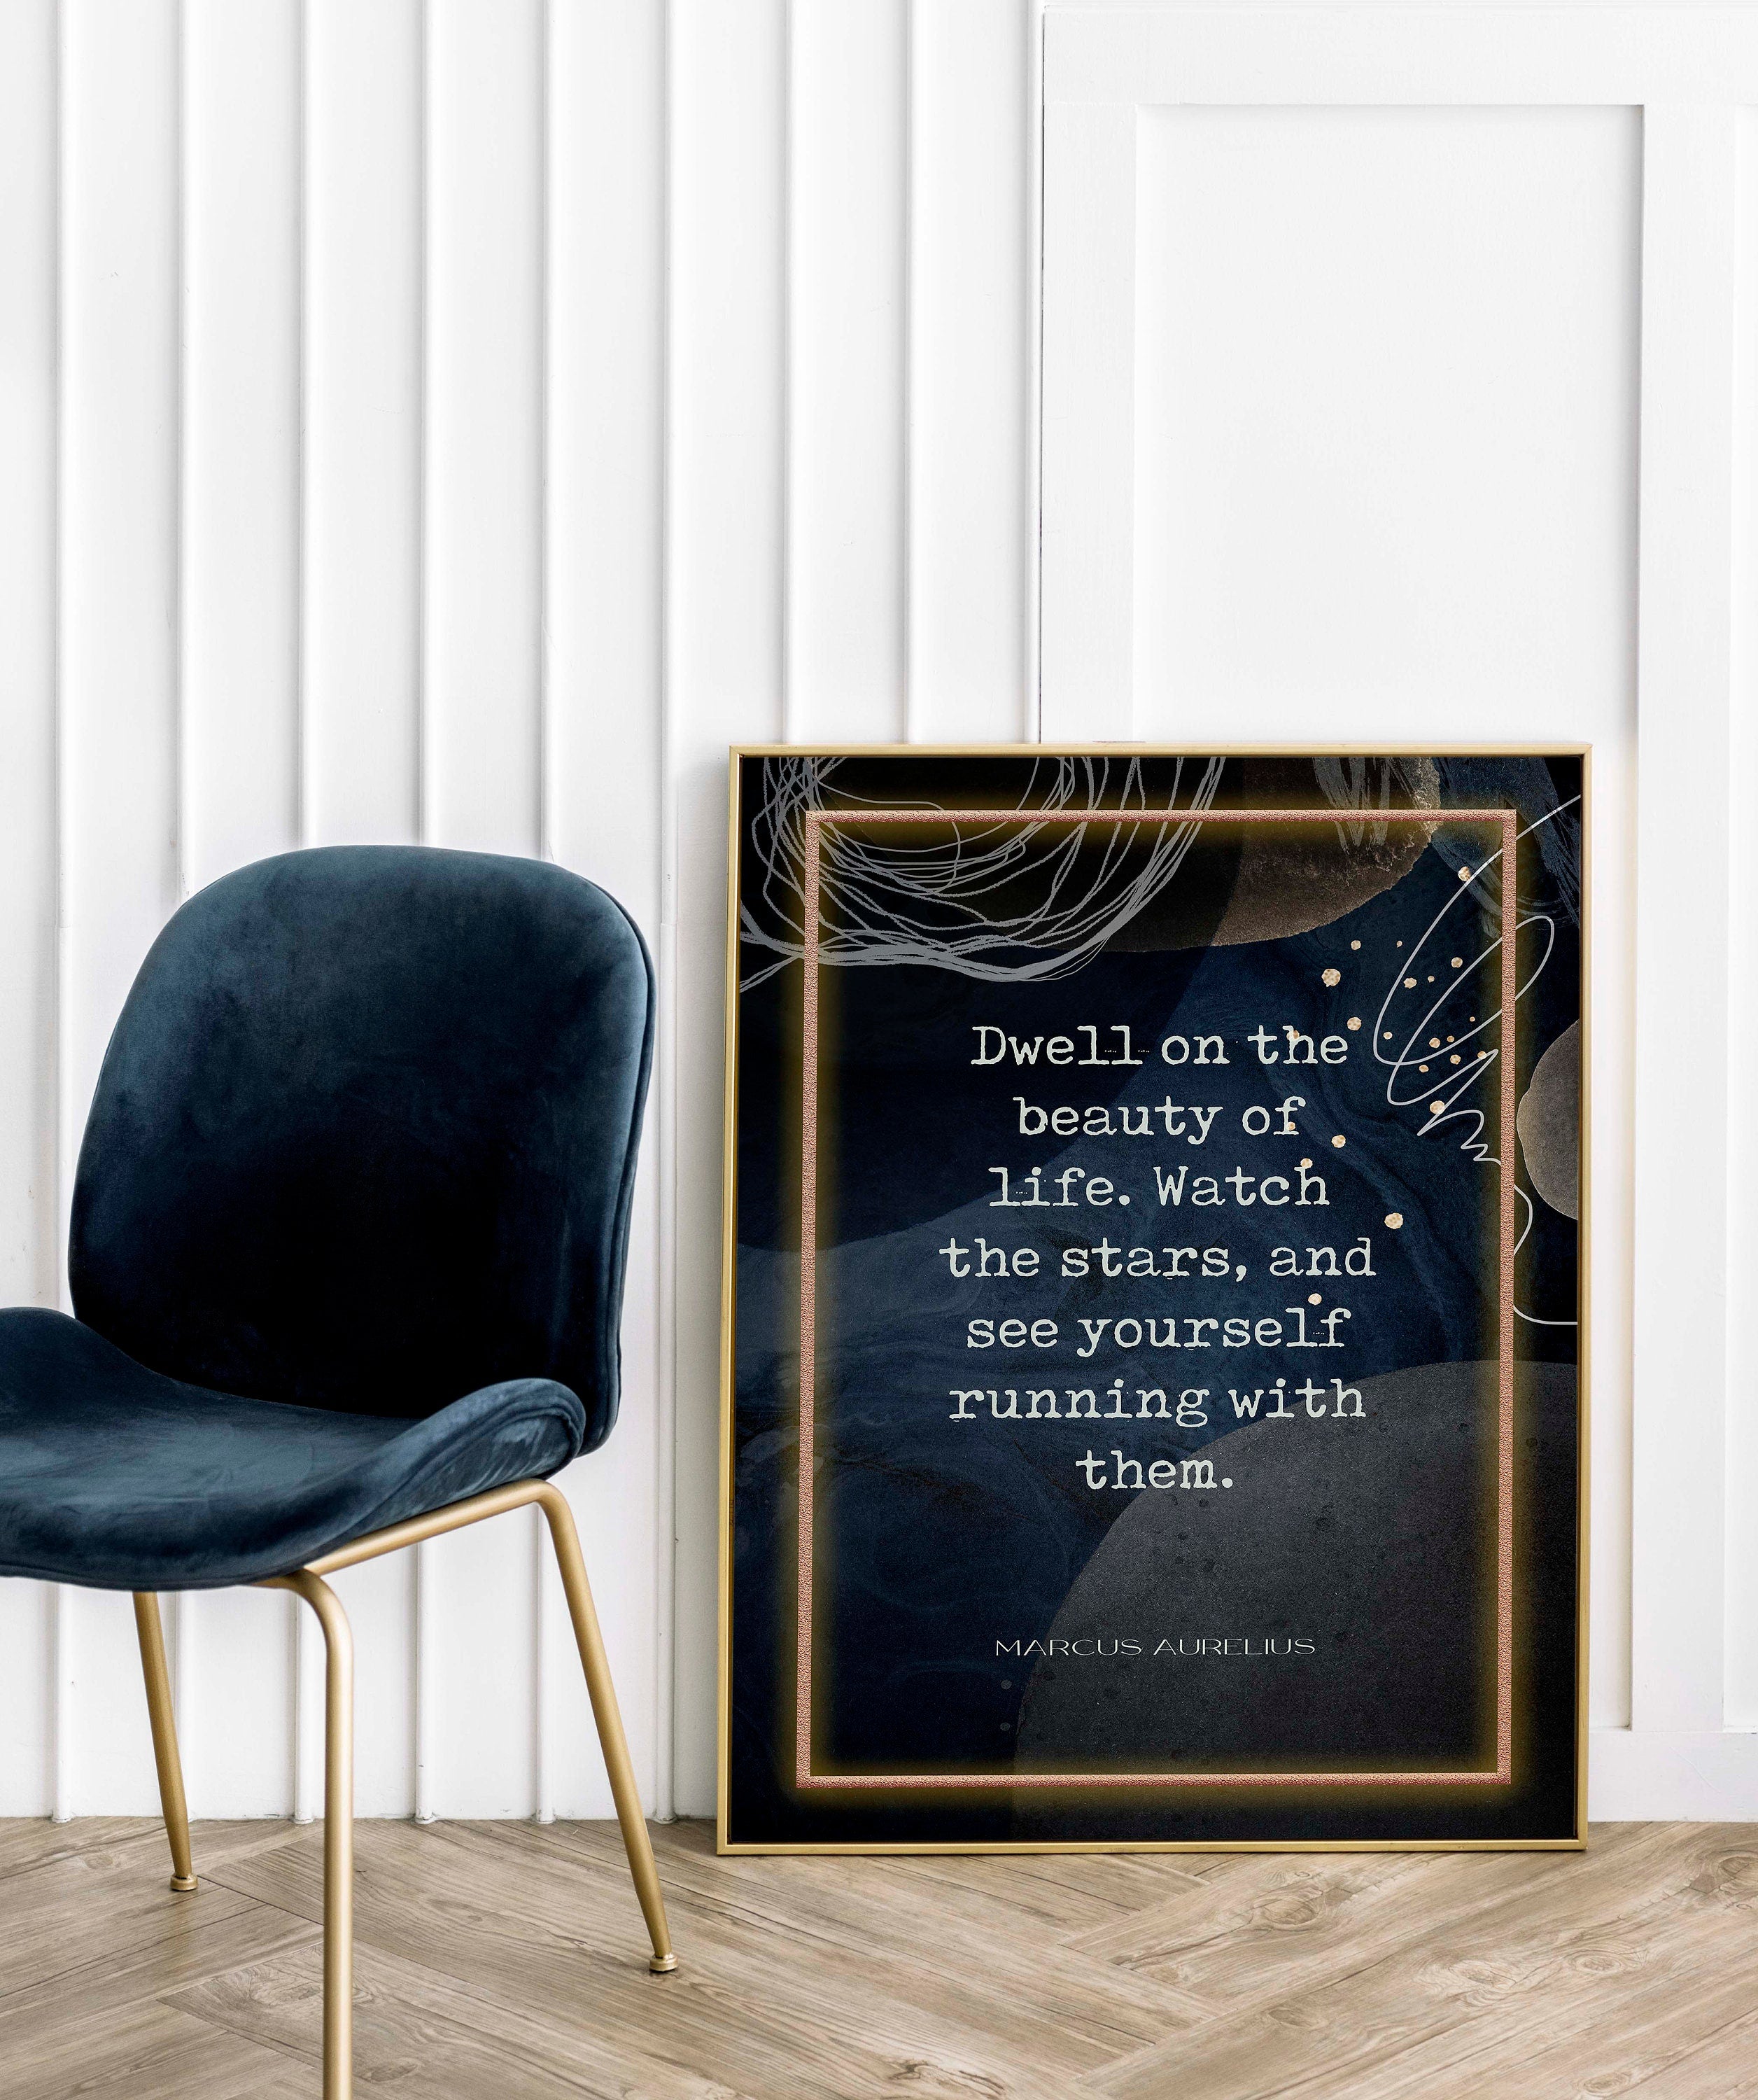 Marcus Aurelius Beauty of Life Quote Wall Art Prints, Unframed Inspirational Wall Decor